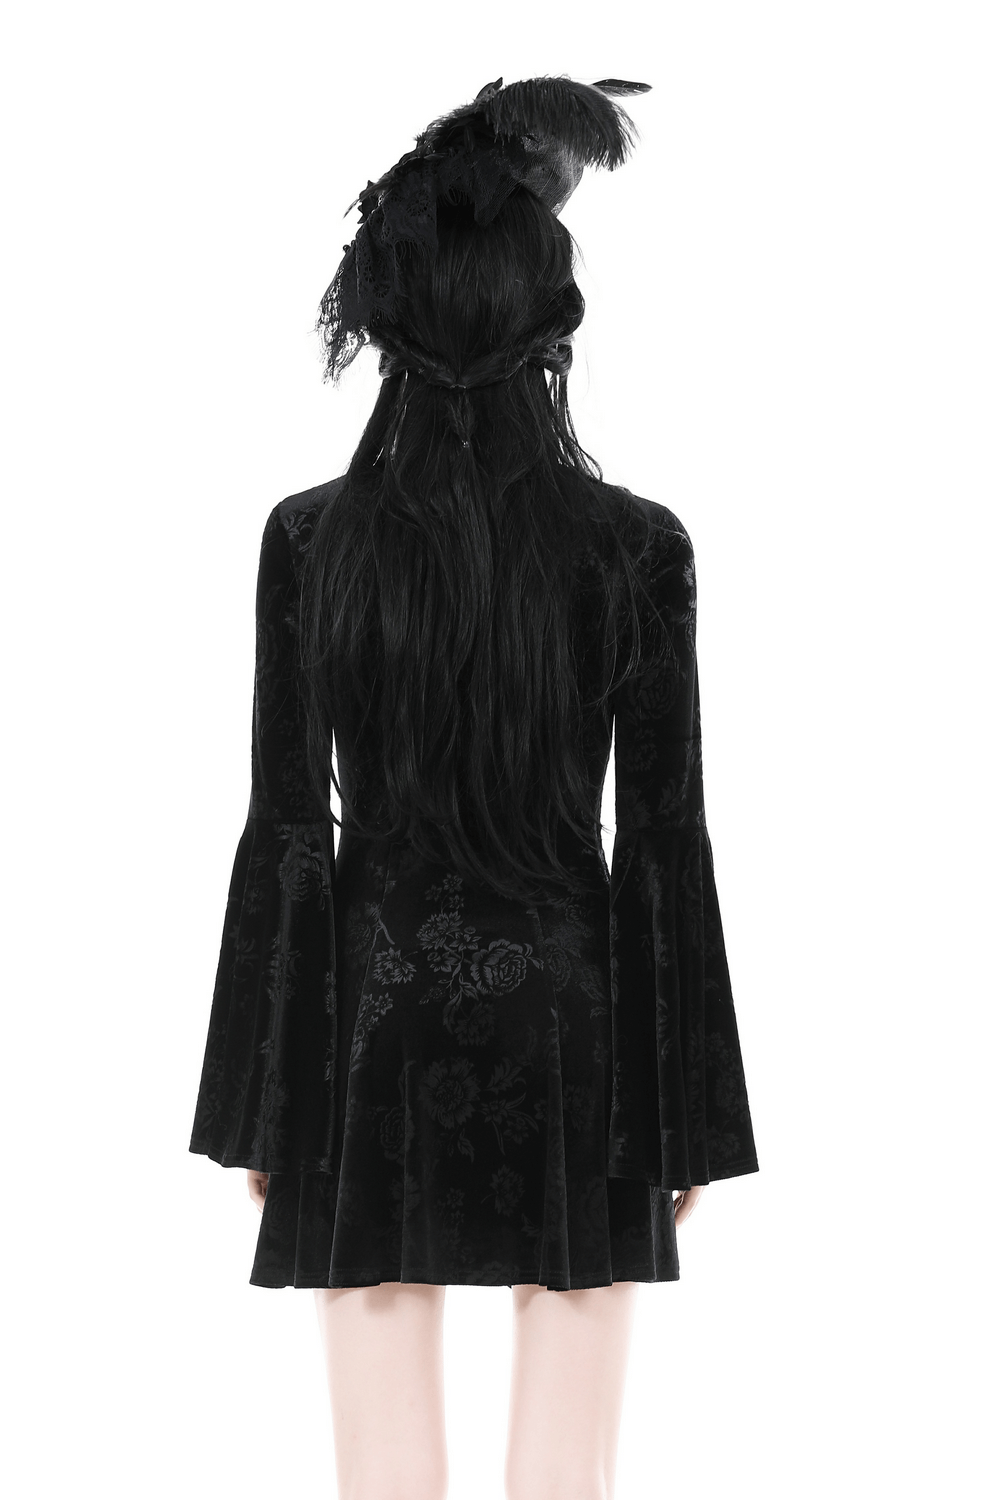 Gothic Velvet Mini Dress with Lace-Up Front and Big Sleeves